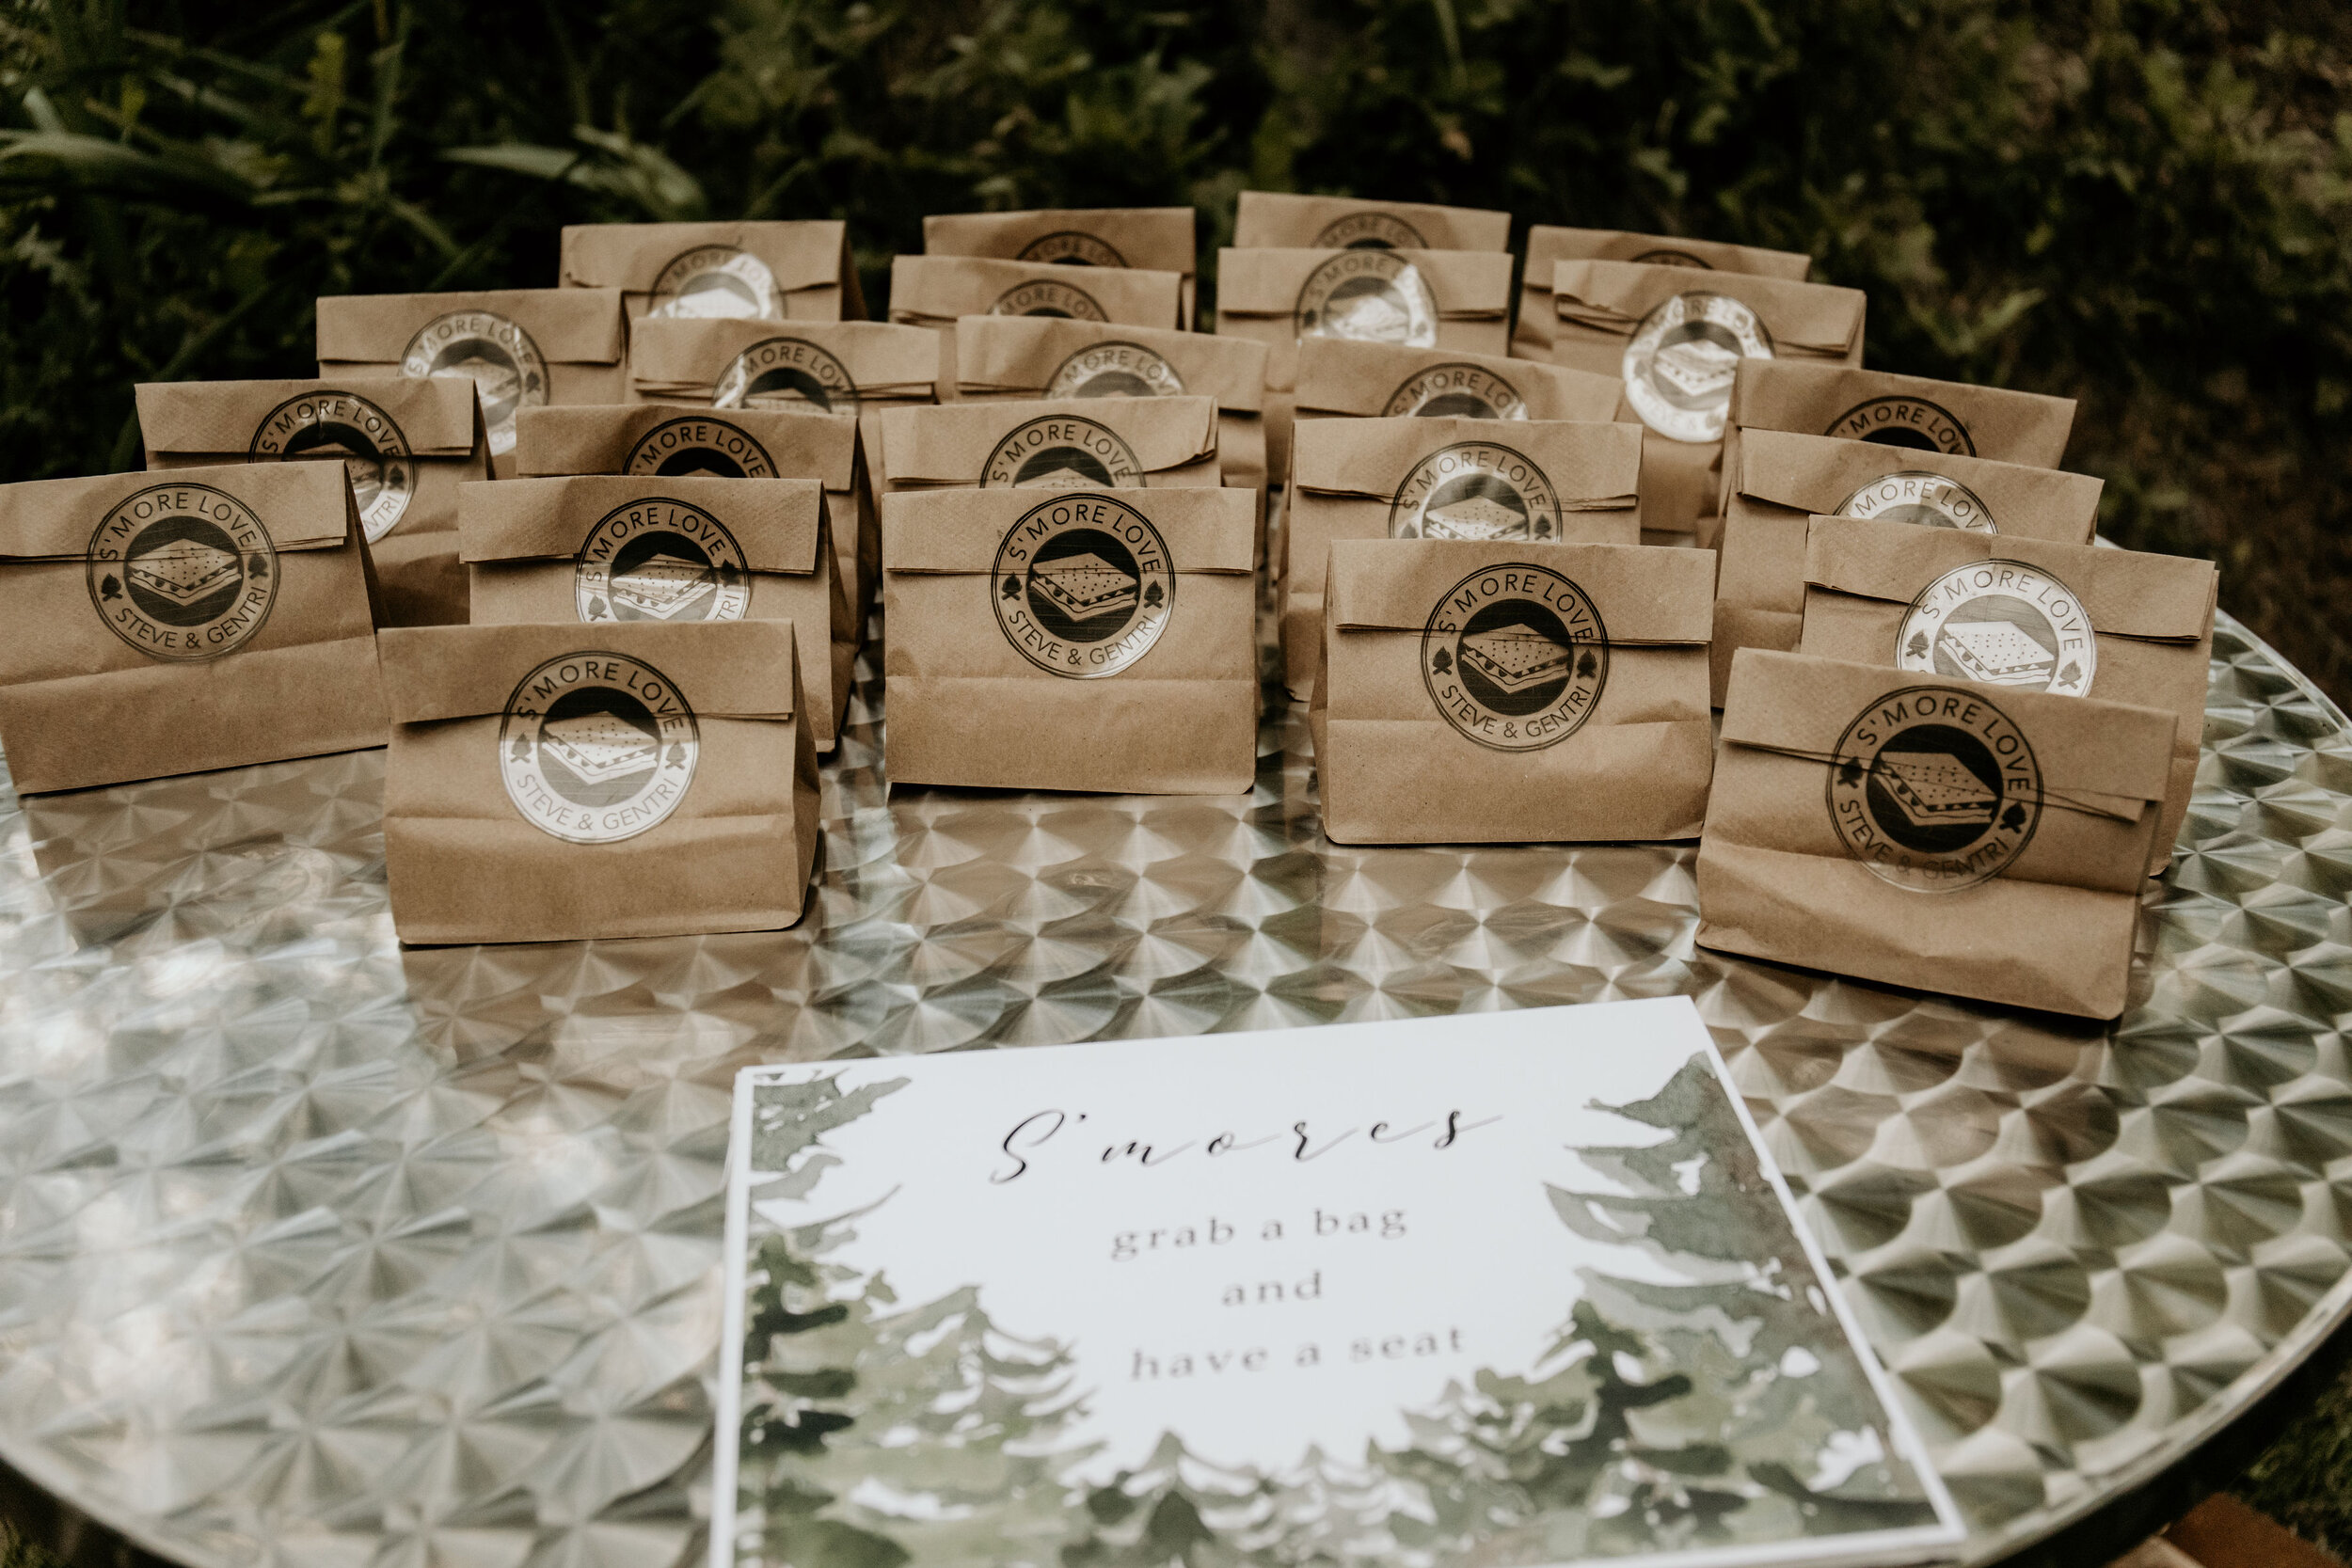  My mom made all of these s’mores bags as well as the cones that held our exit flowers. She did so much to help with the wedding, I can’t express my gratitude enough! 